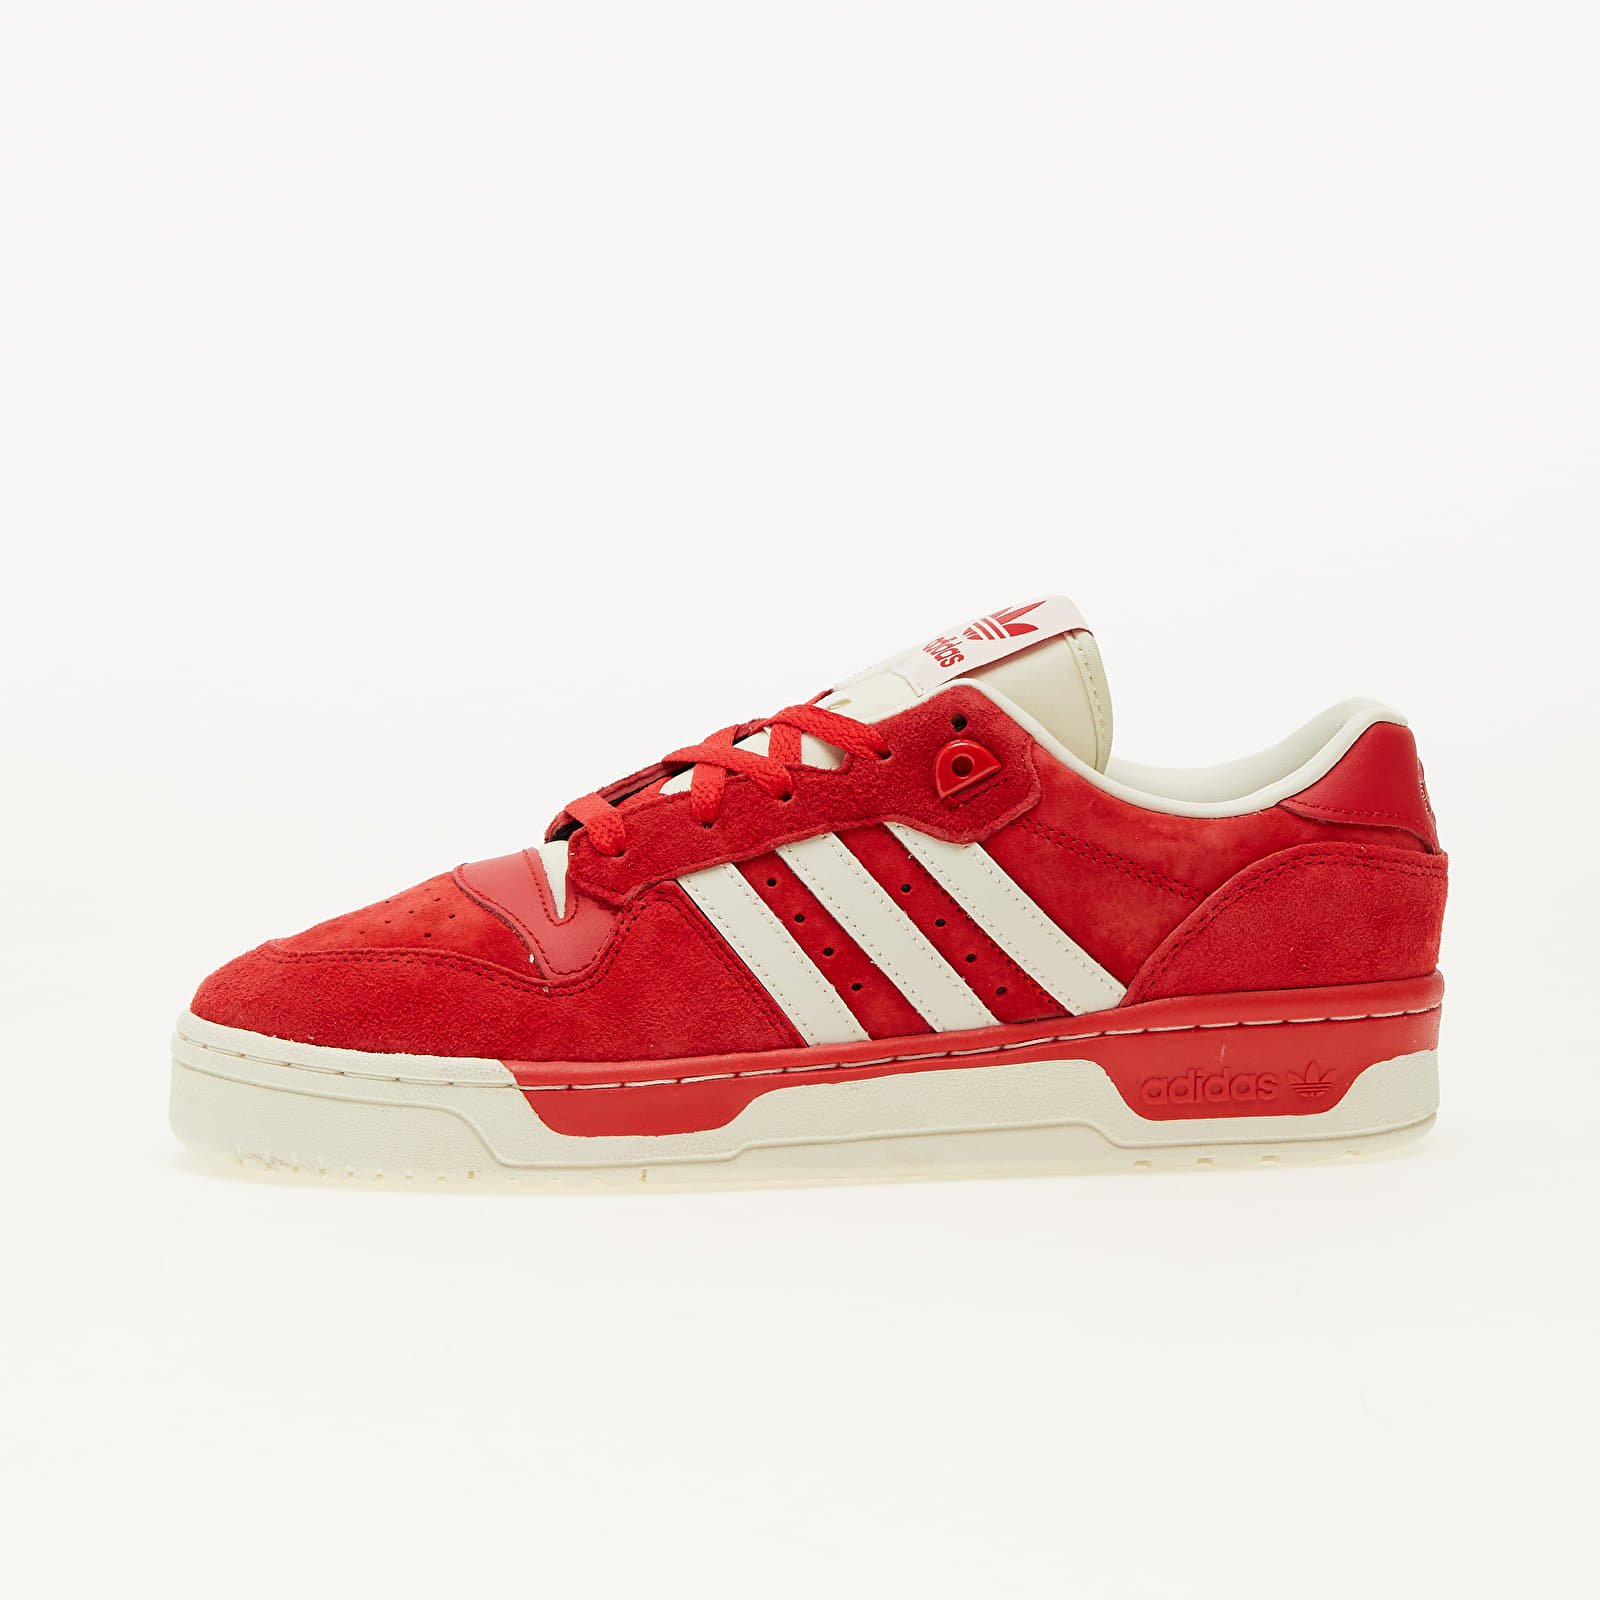 Chaussures et baskets homme adidas Rivalry Low Better Scarlet/ IVORY/ Better Scarlet